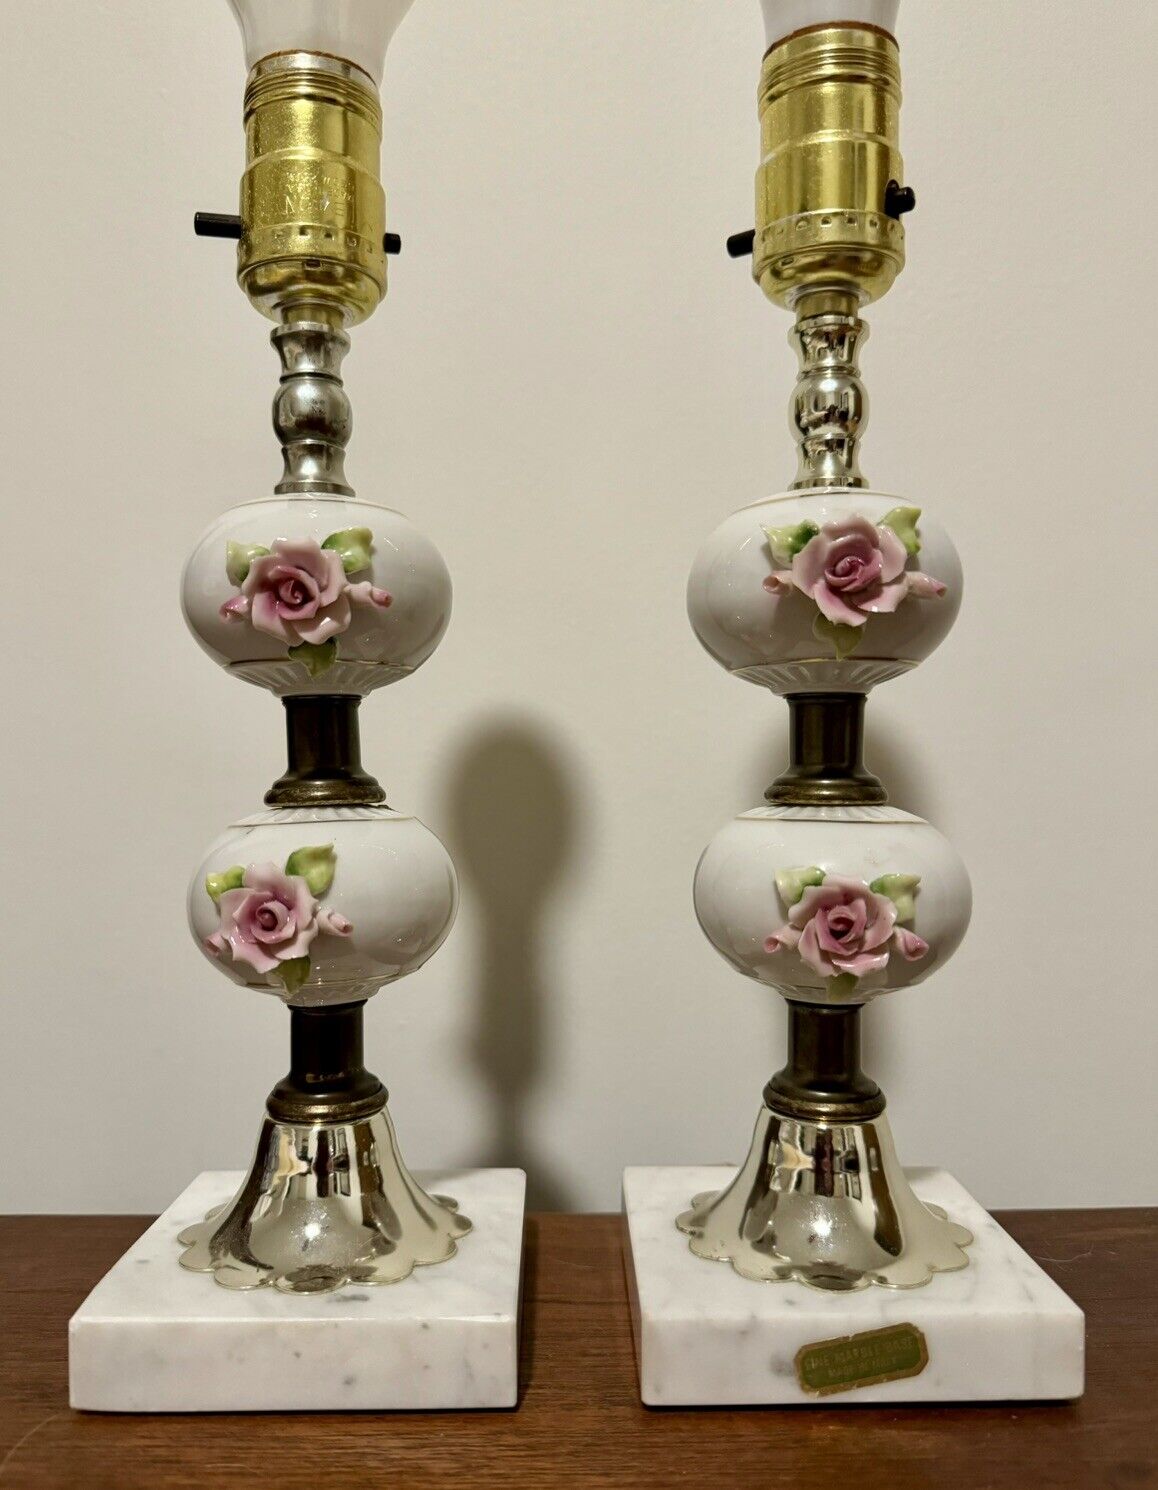 Vintage Retro Porcelain Table Lamps With Floral/Roses With Marble Based 1950s